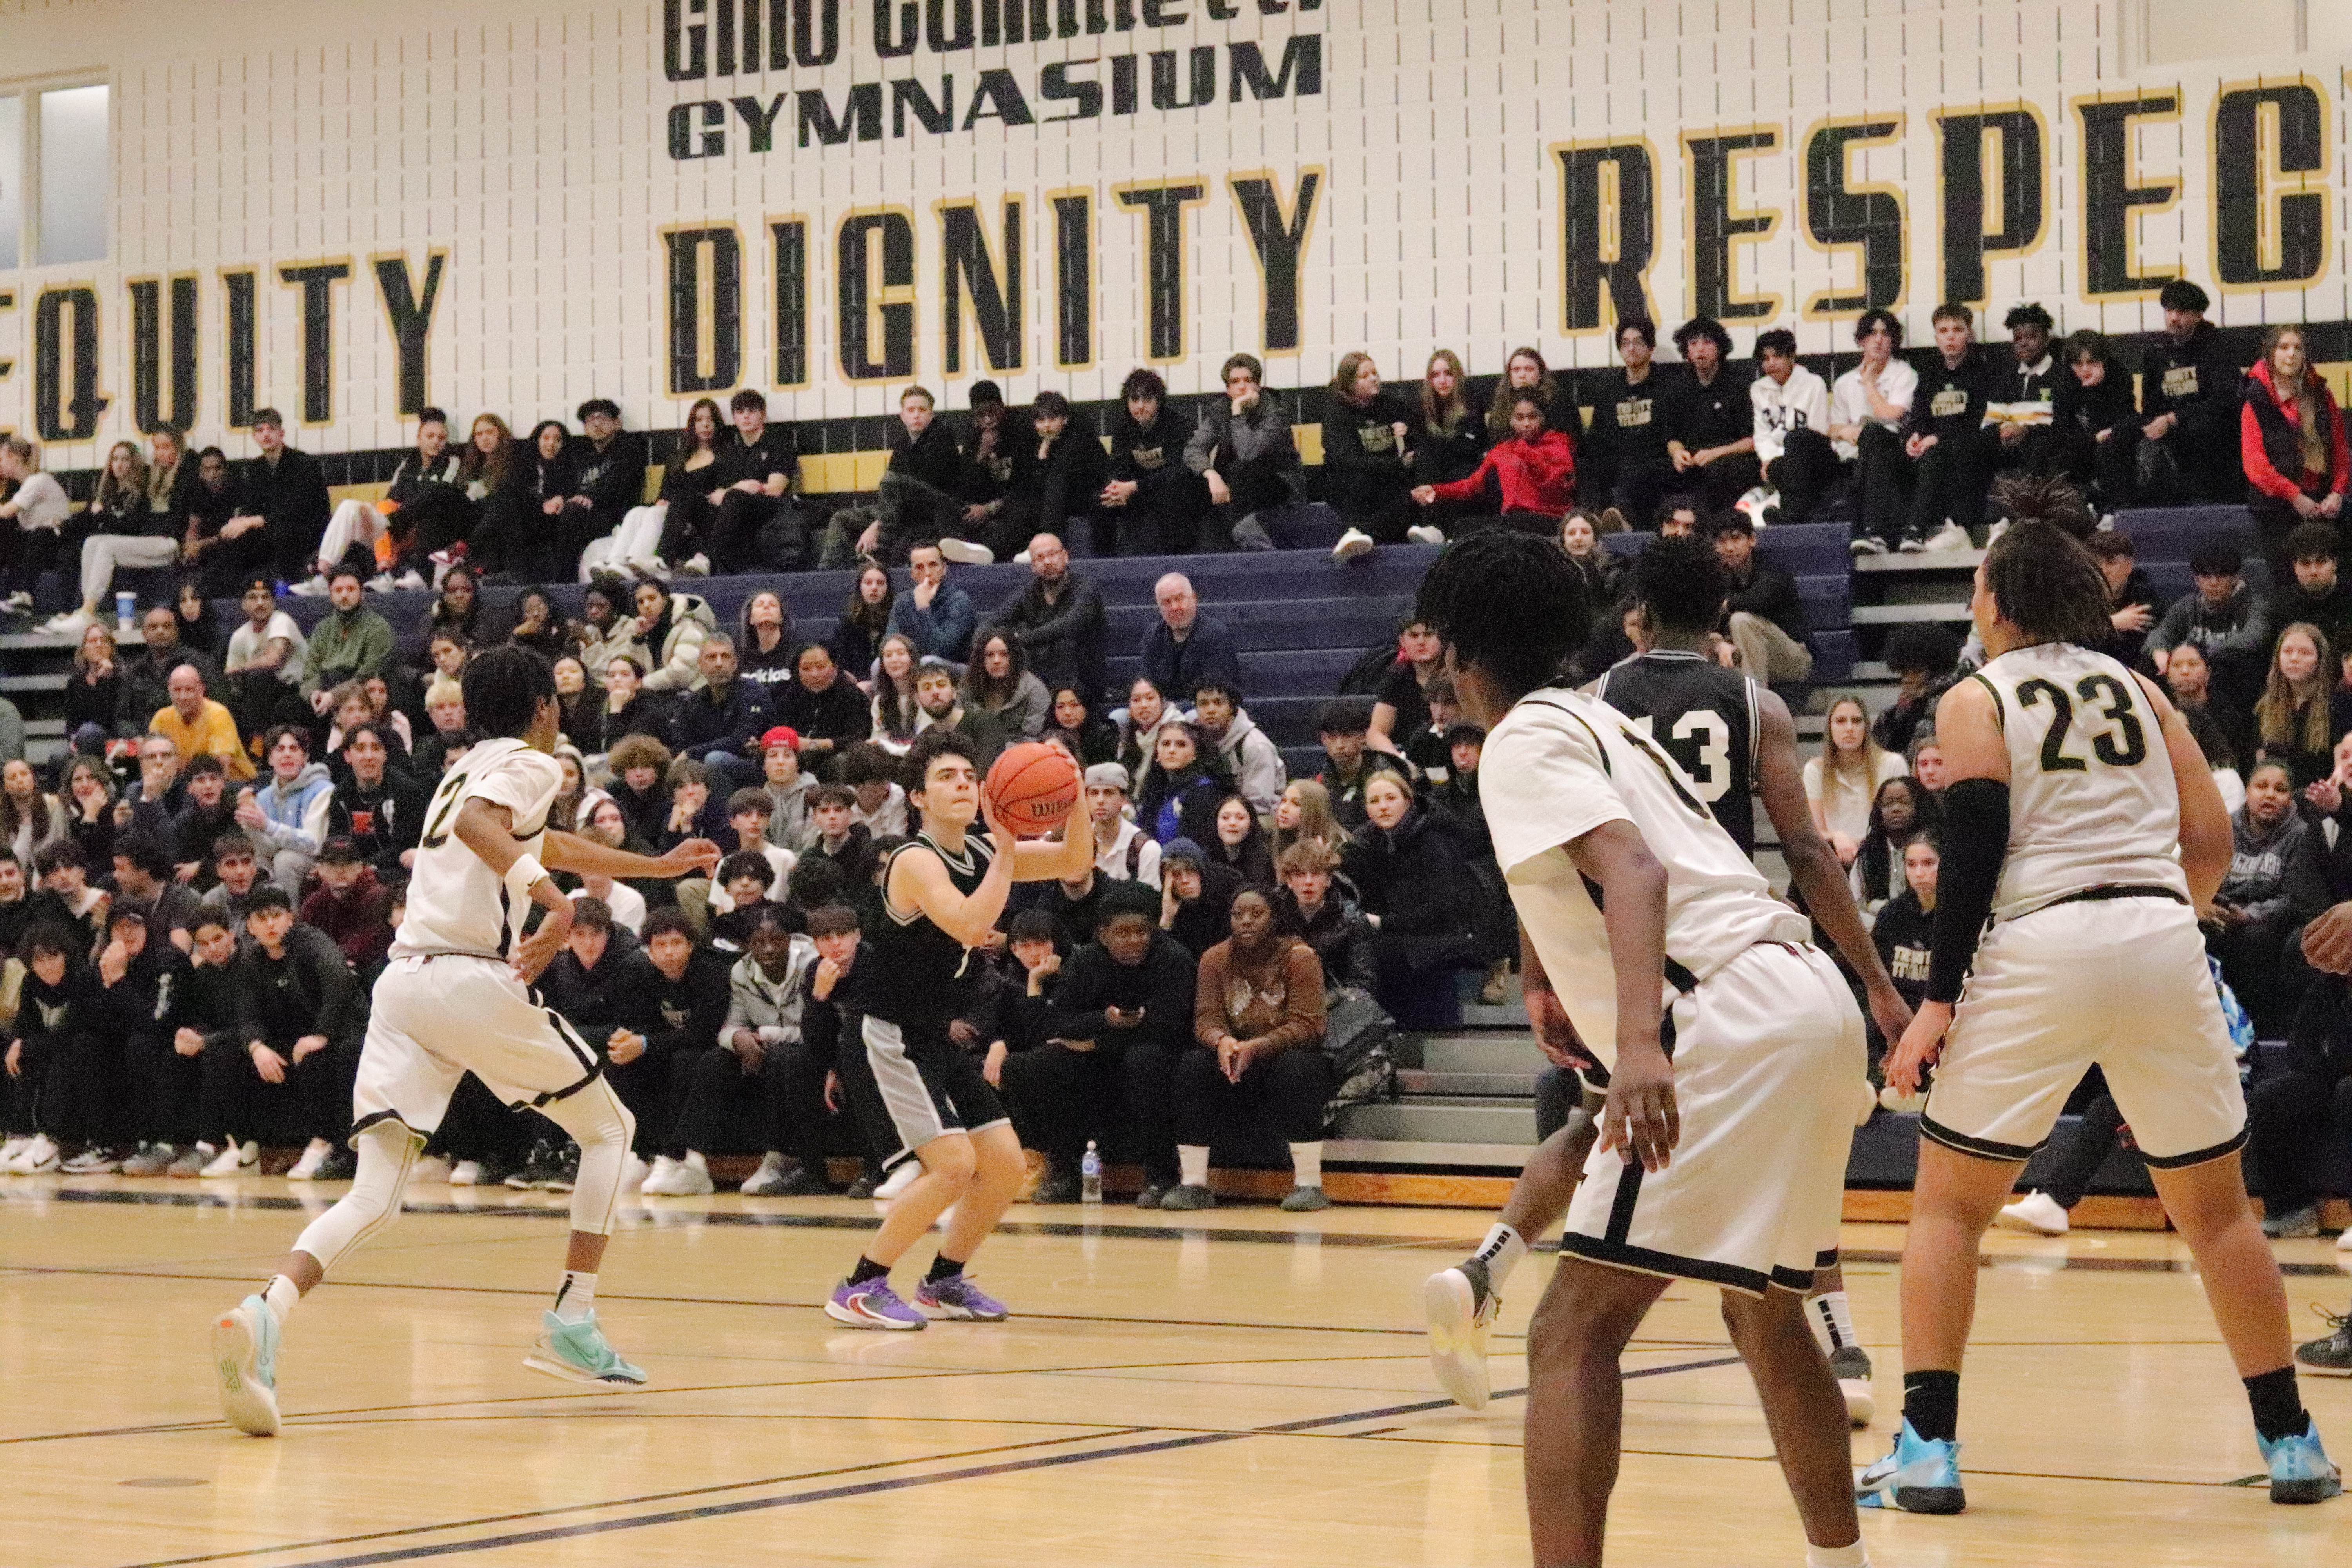 Aquinas fought hard | The Raiders were able to claw their way back to within 7 in the 3rd Quarter, but turnovers and careless fouls let them down in the end. | Pierce Lang